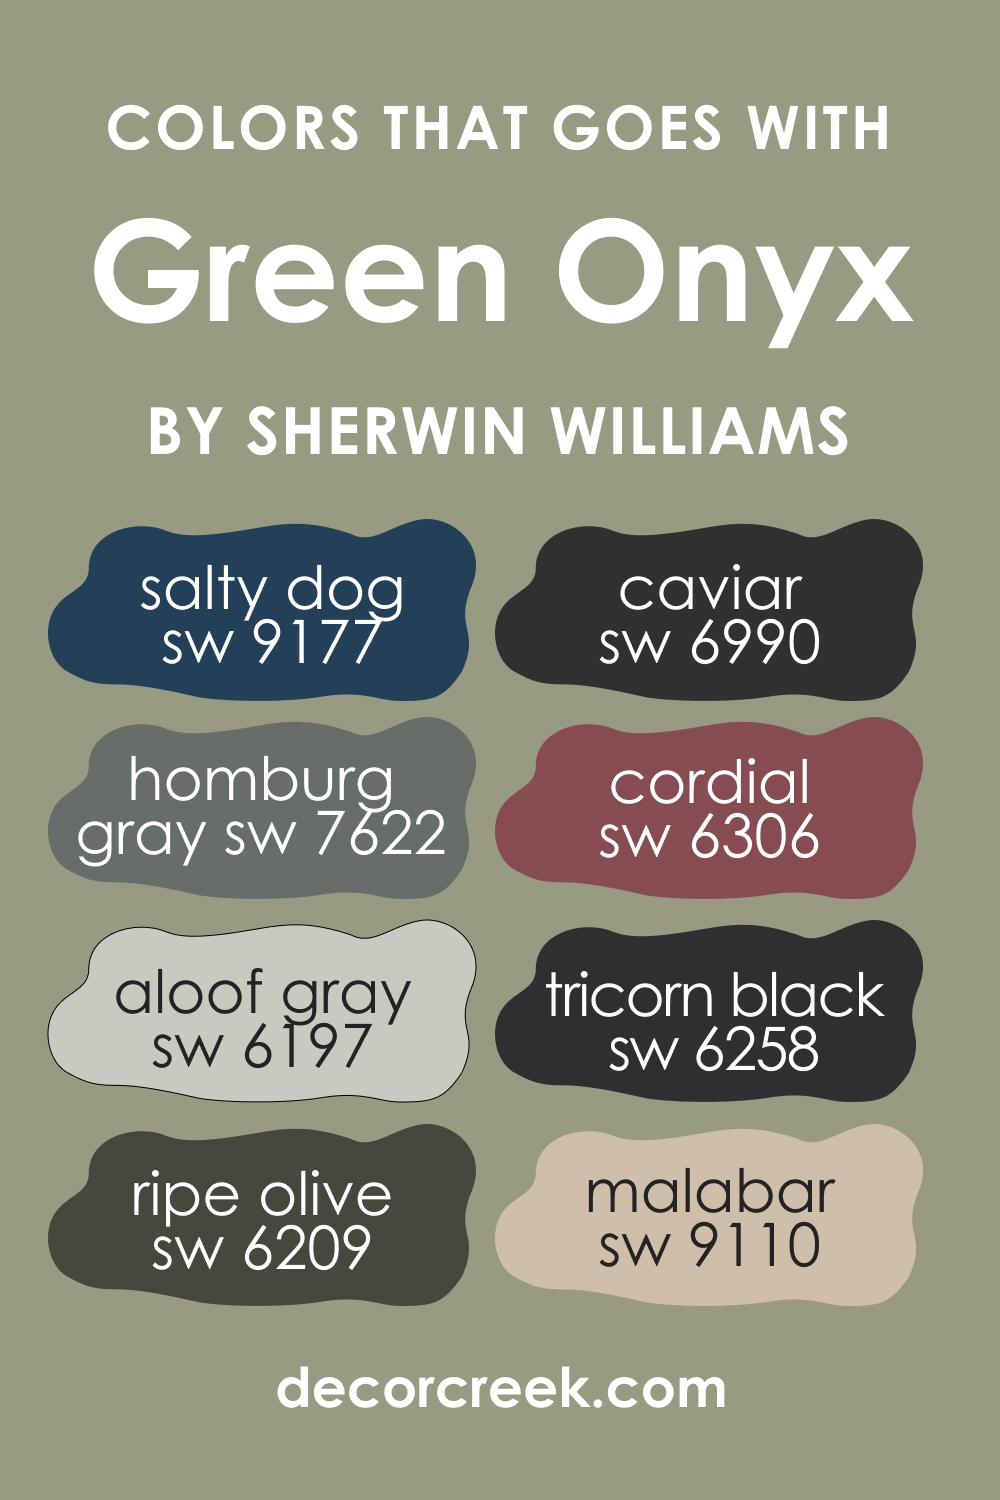 Colors That Go Well With Green Onyx SW 9128